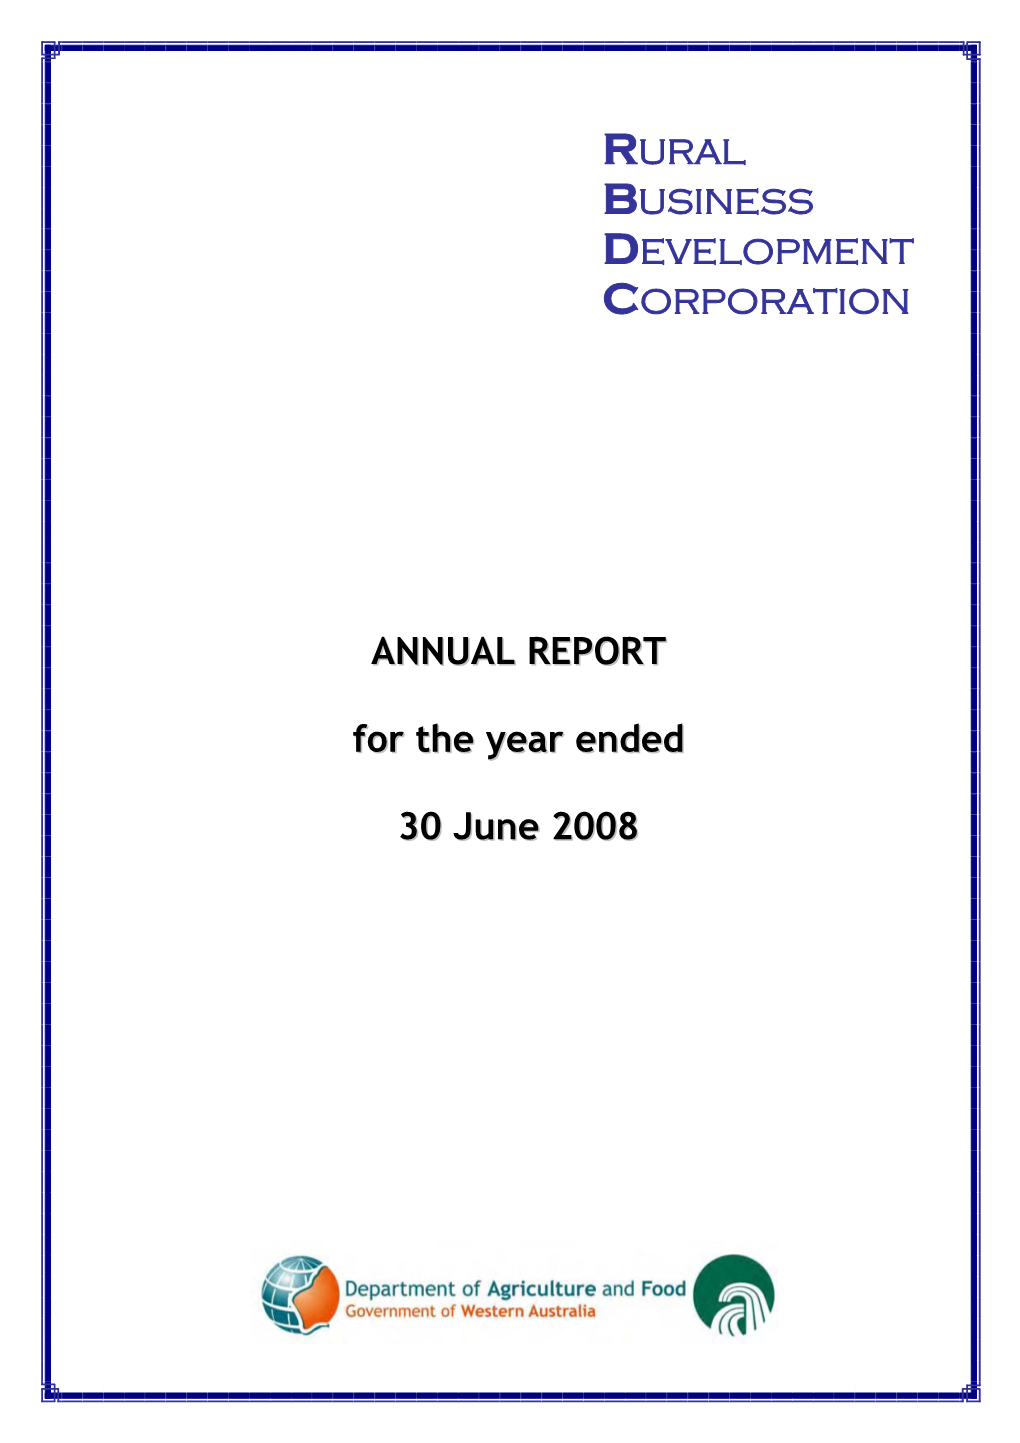 ANNUAL REPORT for the Year Ended 30 June 2008